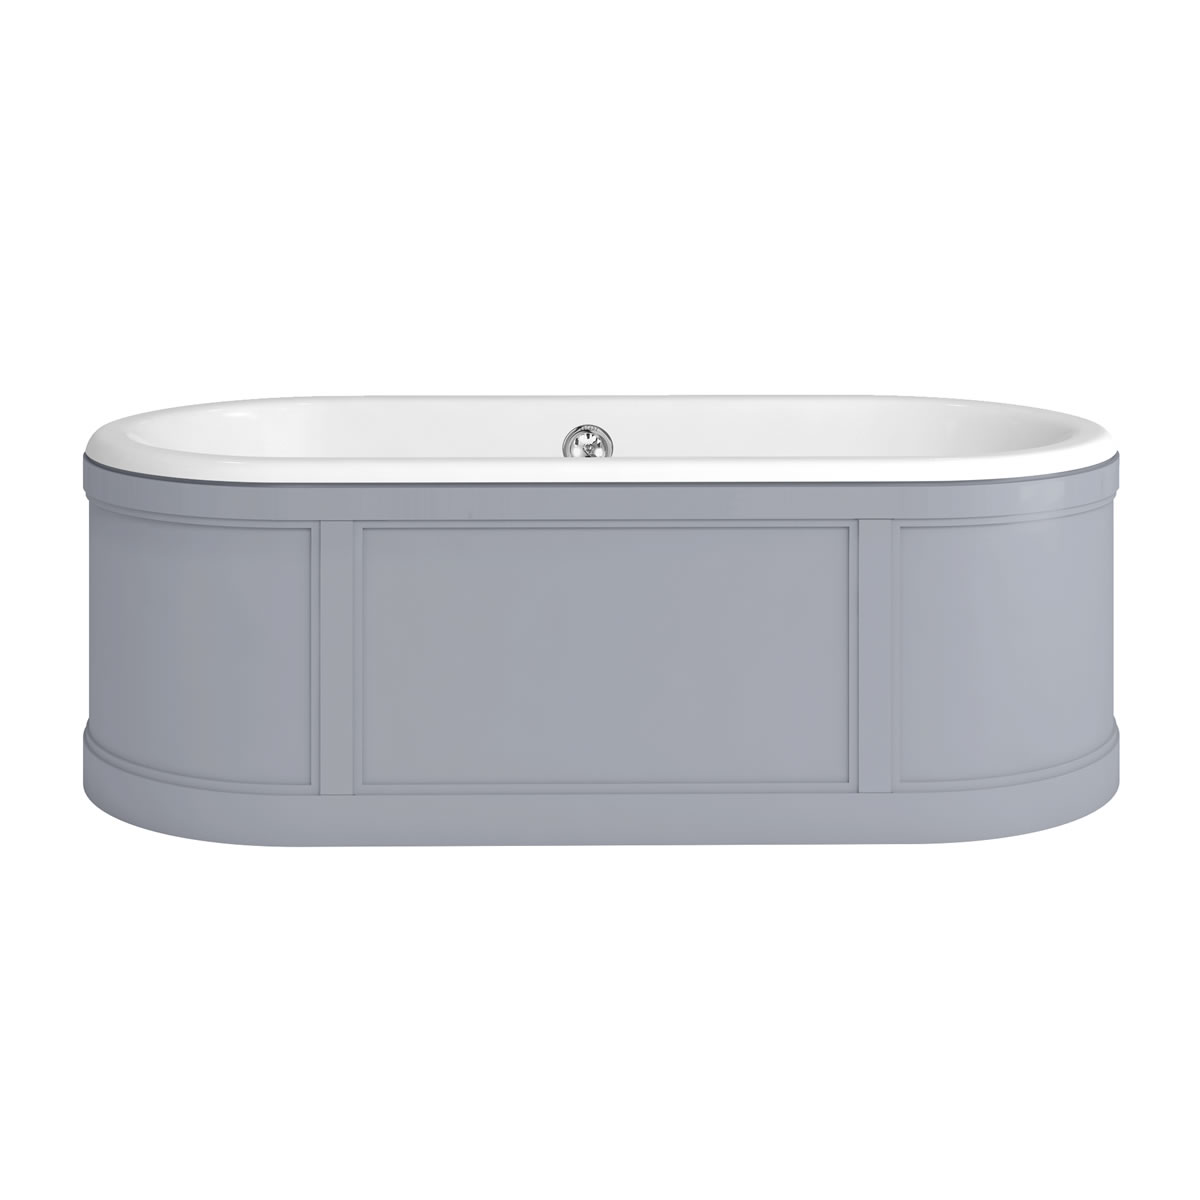 London Bath with Curved Surround incl overflow & waste - Classic Grey